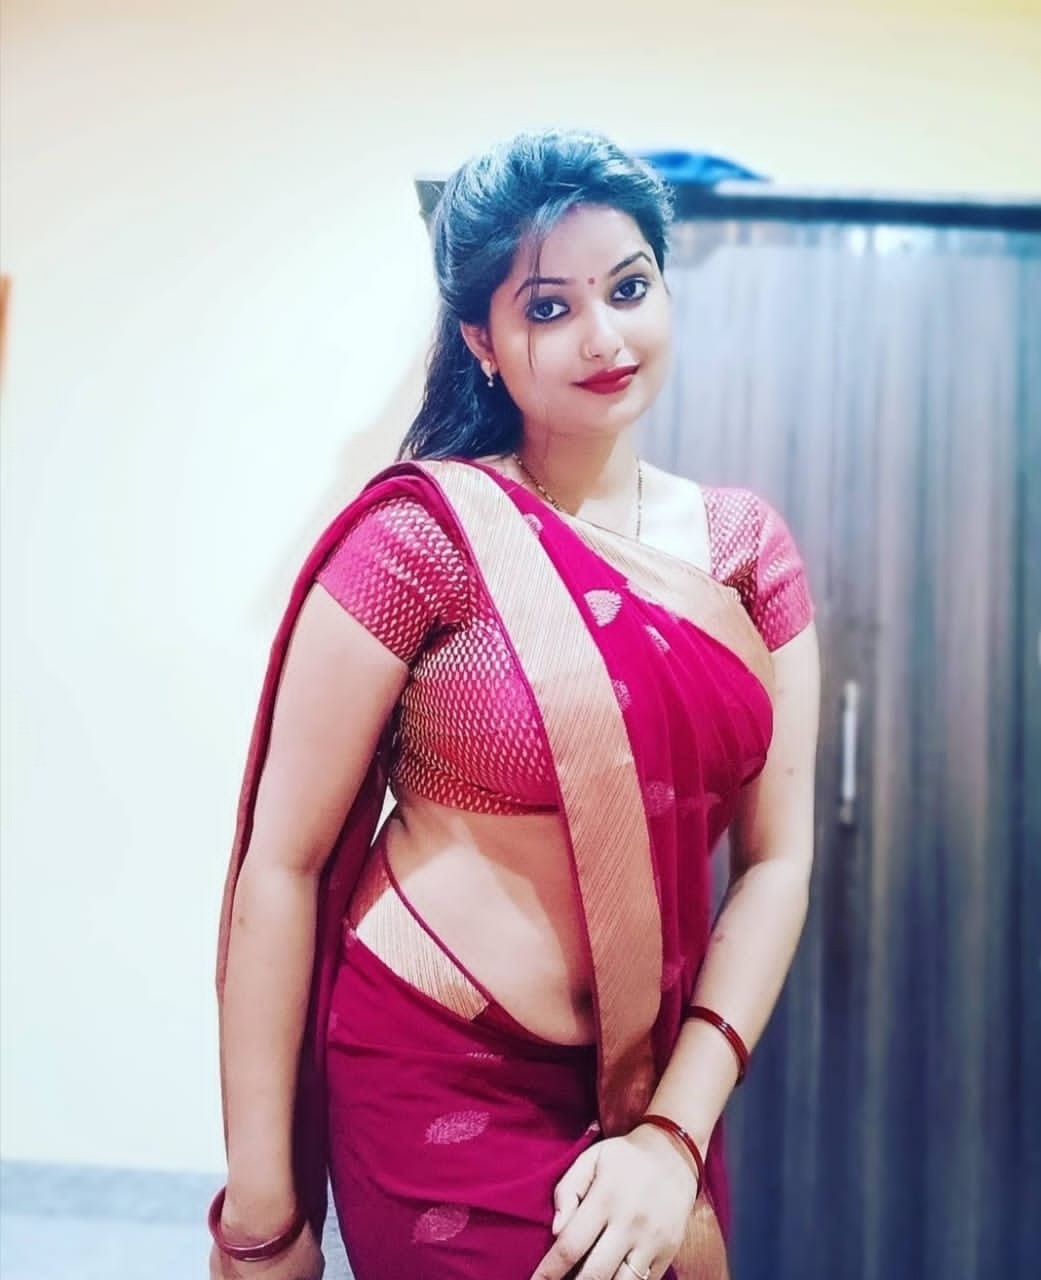 Yelahanka Bast call girls with hotel rooms safe secure and rooms ♈